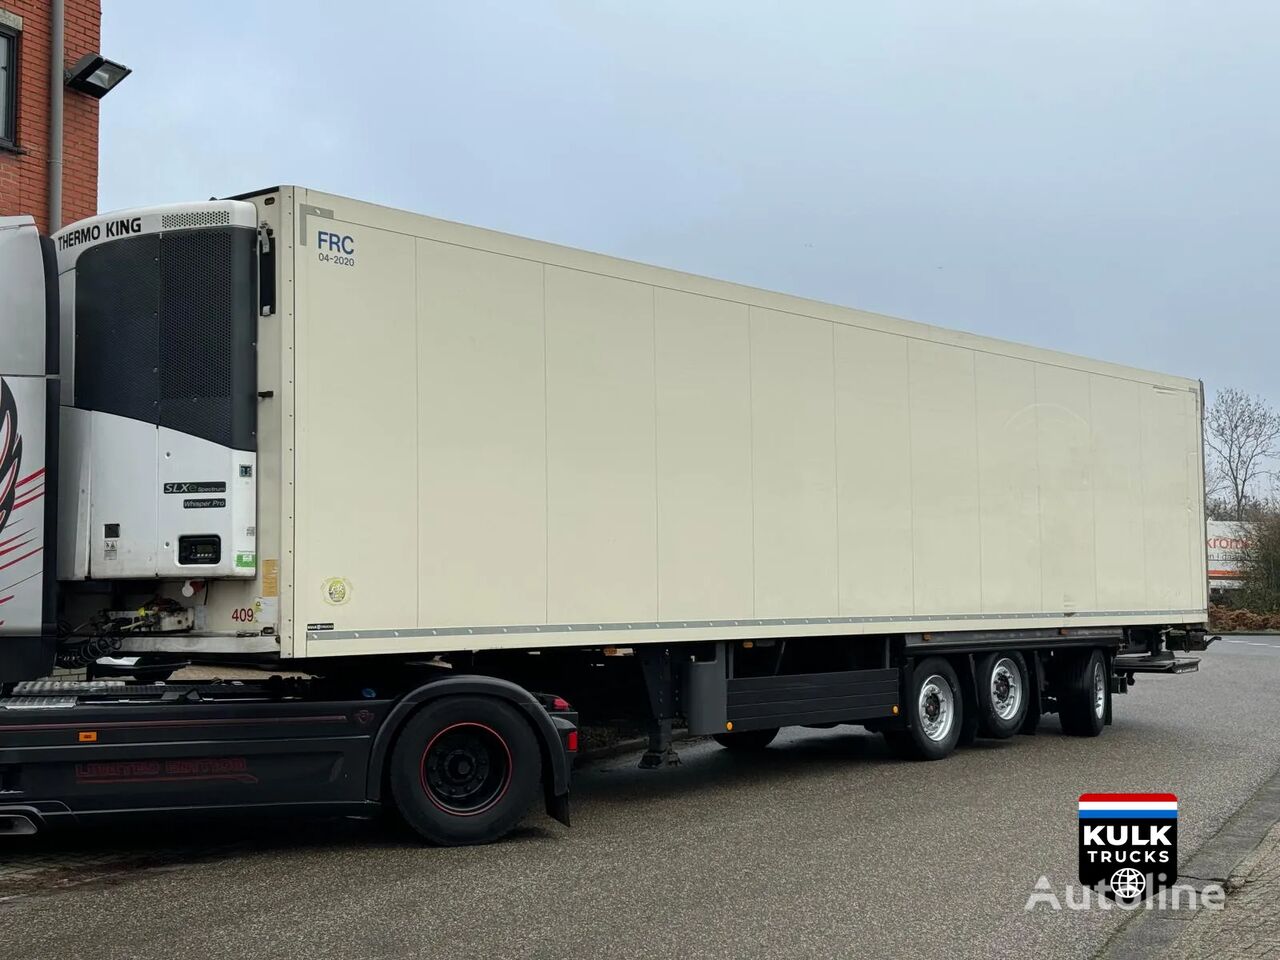 Schmitz Cargobull N/A CITY COOL / 2 COMPARTIMENT THERMO KING / DISK BRAKES isothermal semi-trailer